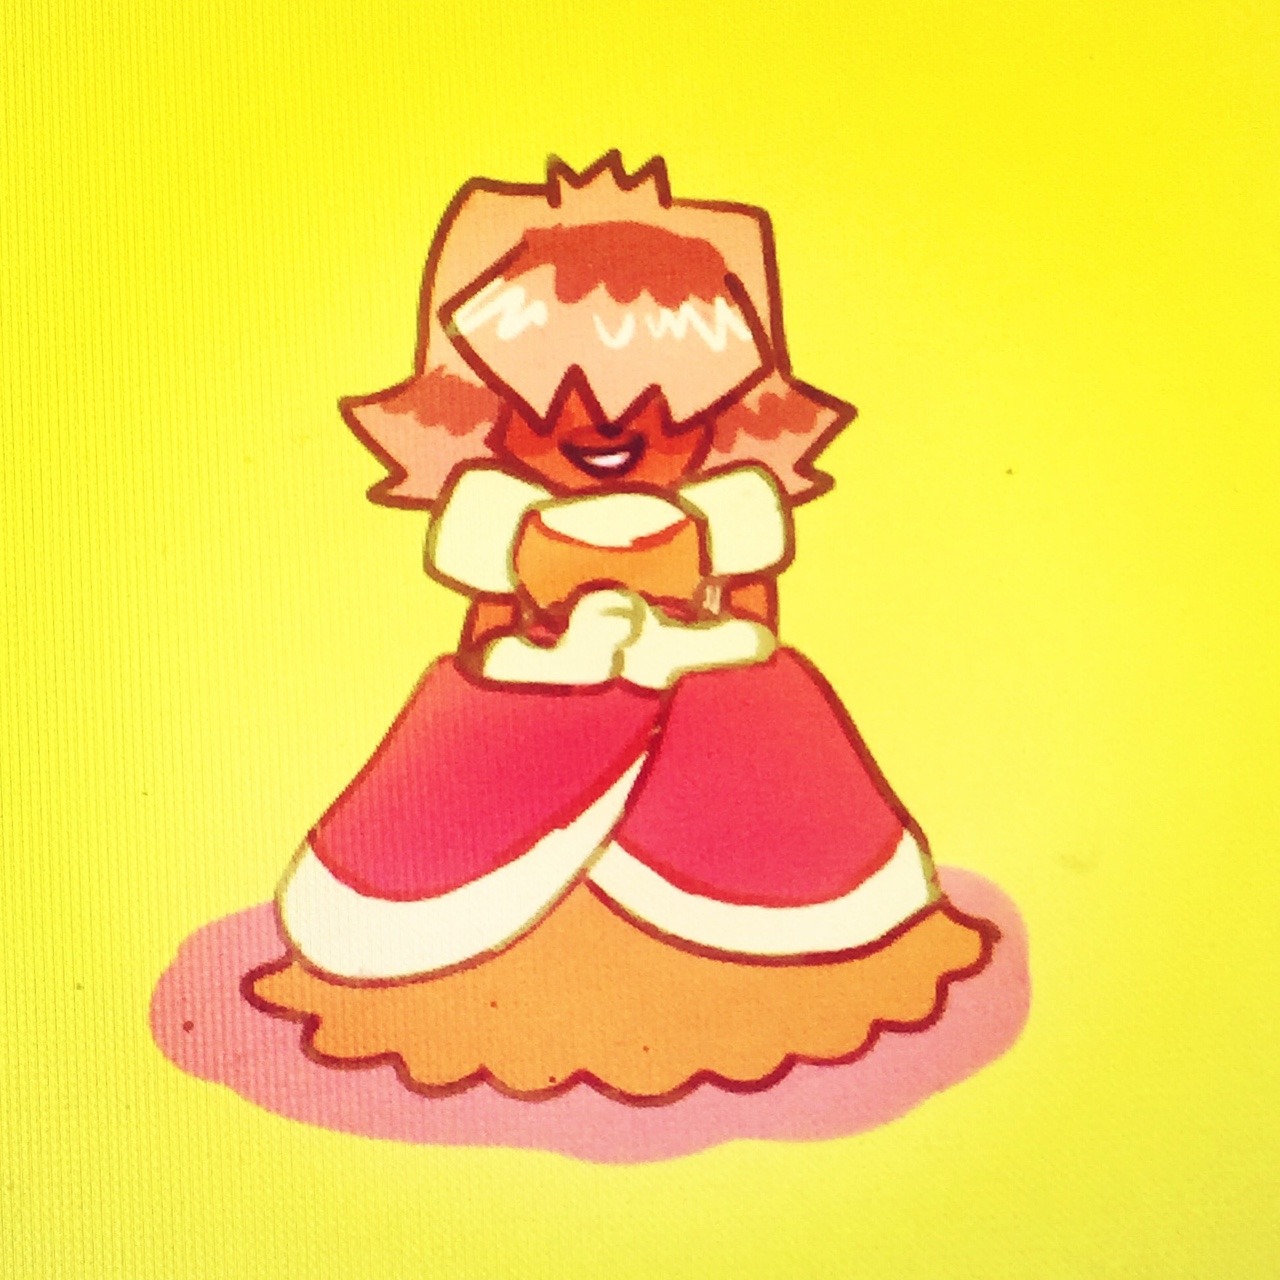 A little padparascha because she’s cute